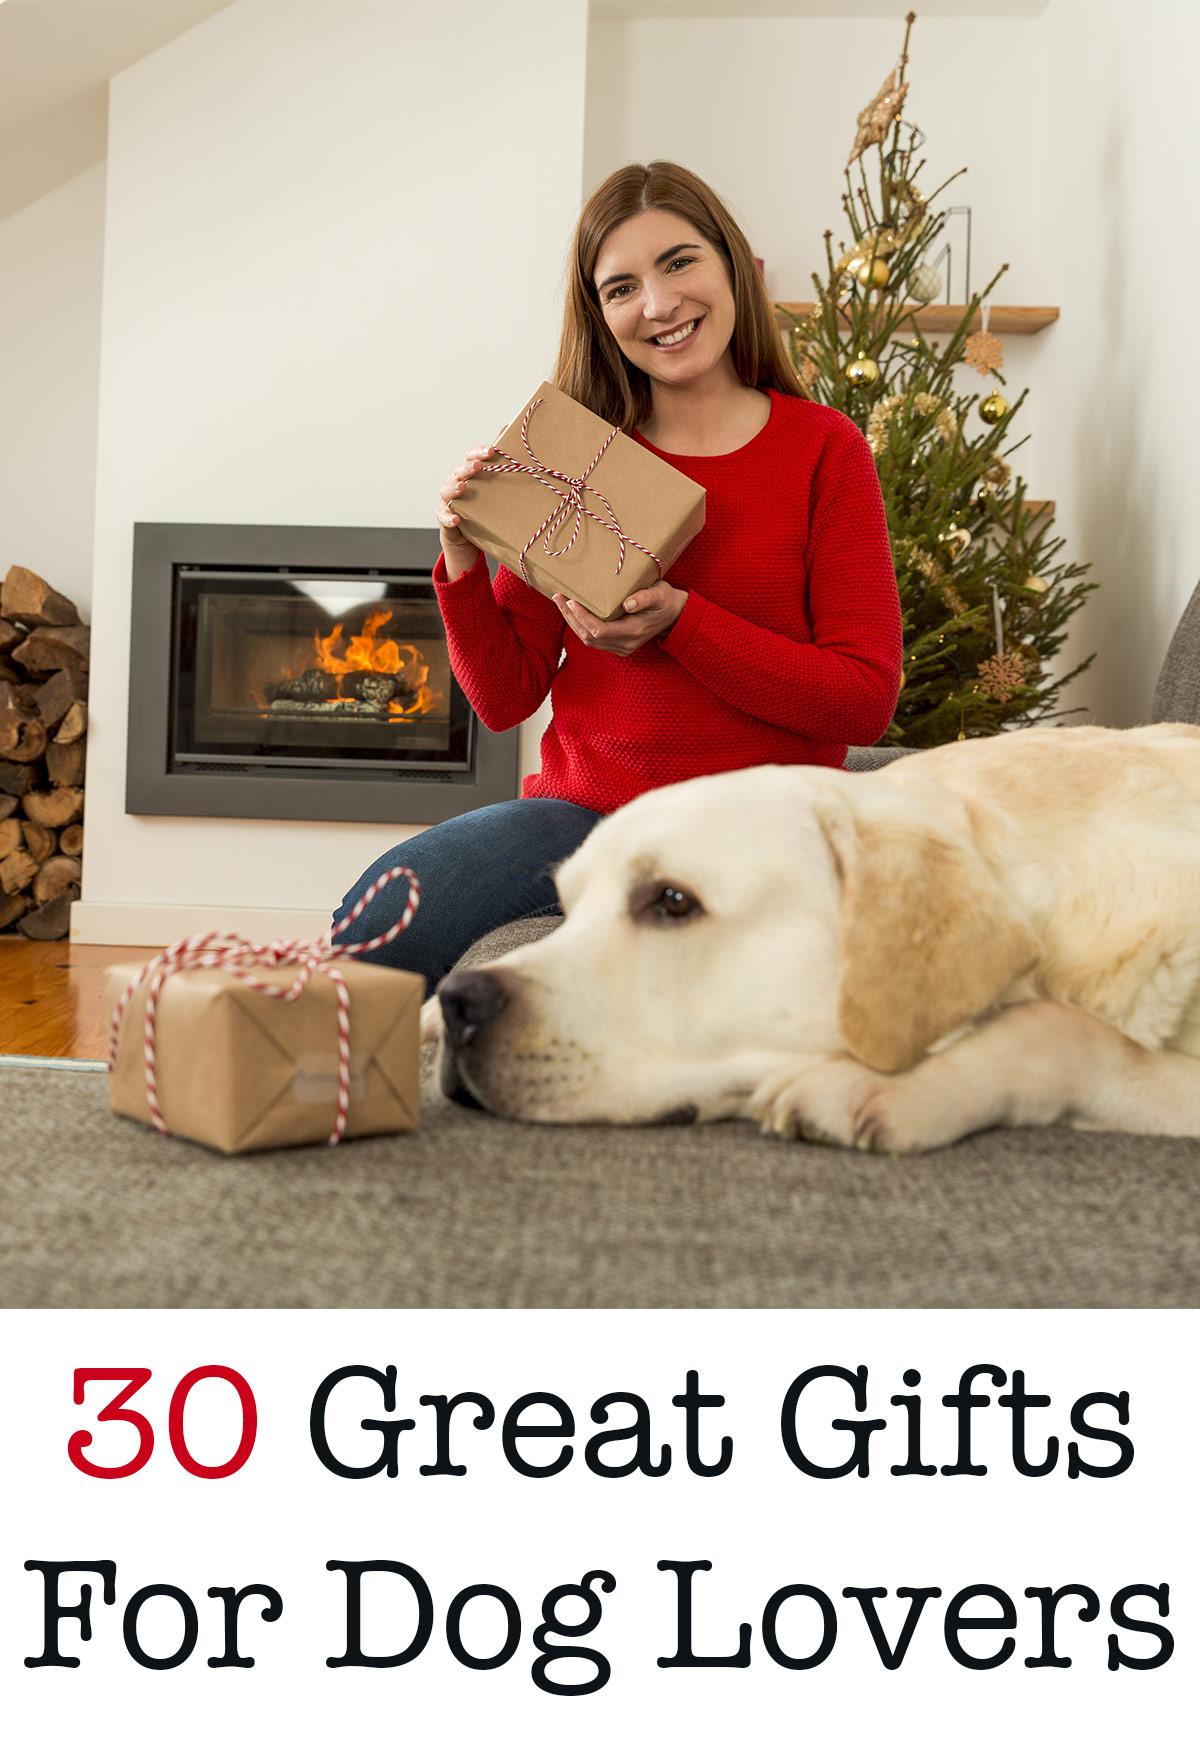 birthday gifts for animal lovers